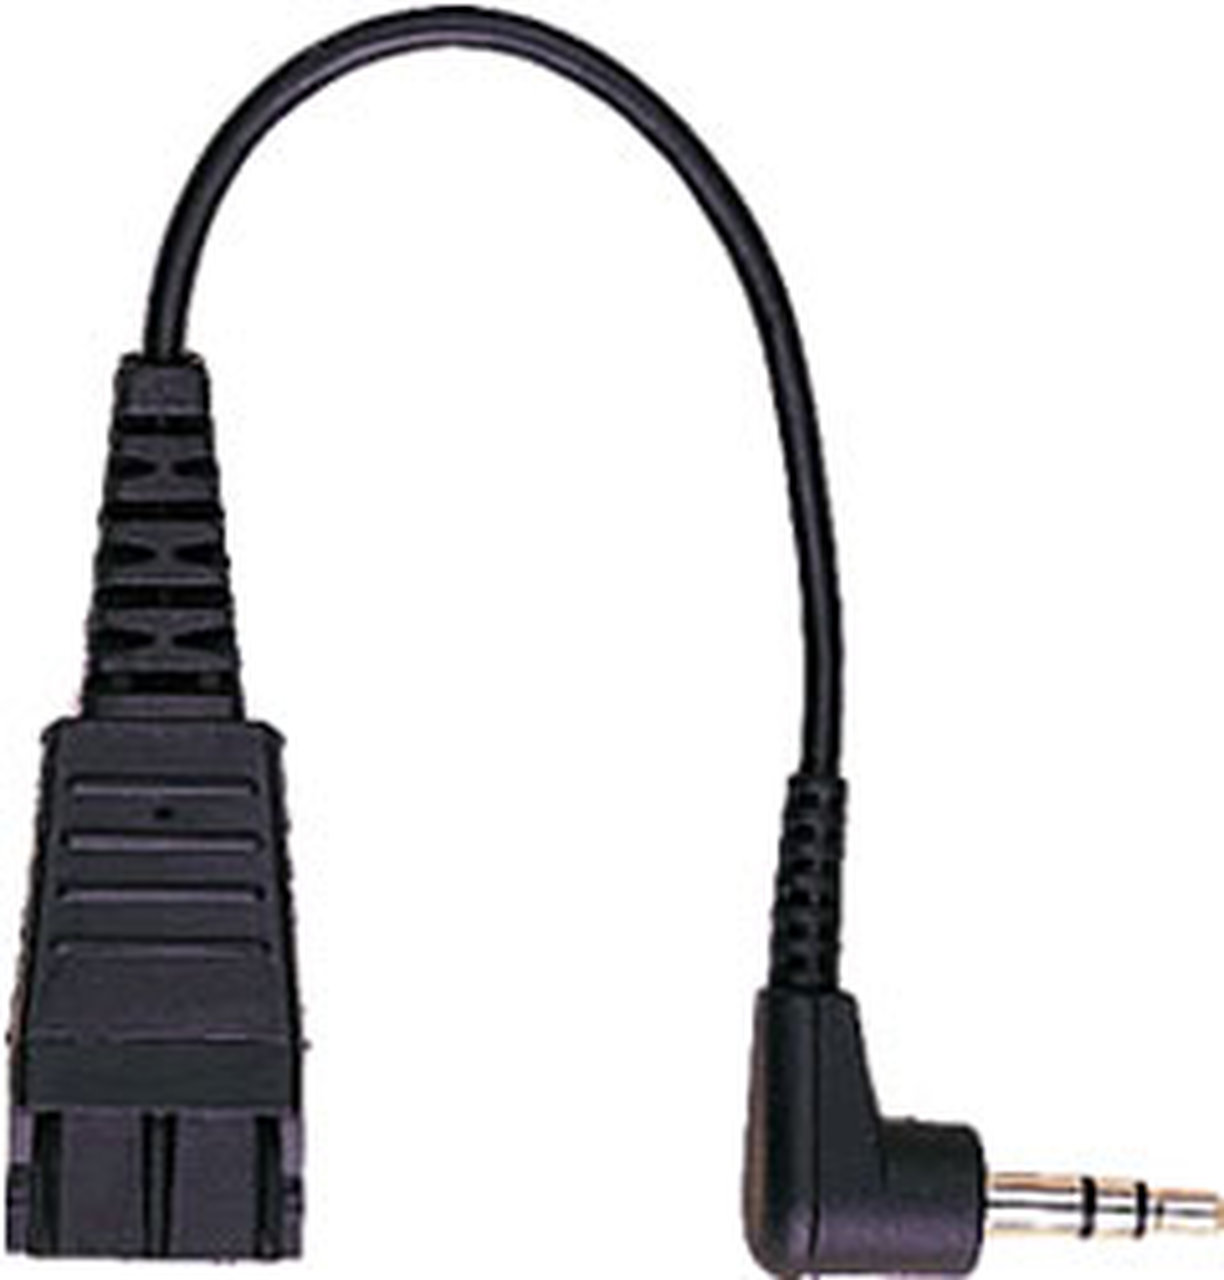 jabra 2.5mm headset adapter qd cable 8800-00-46 view